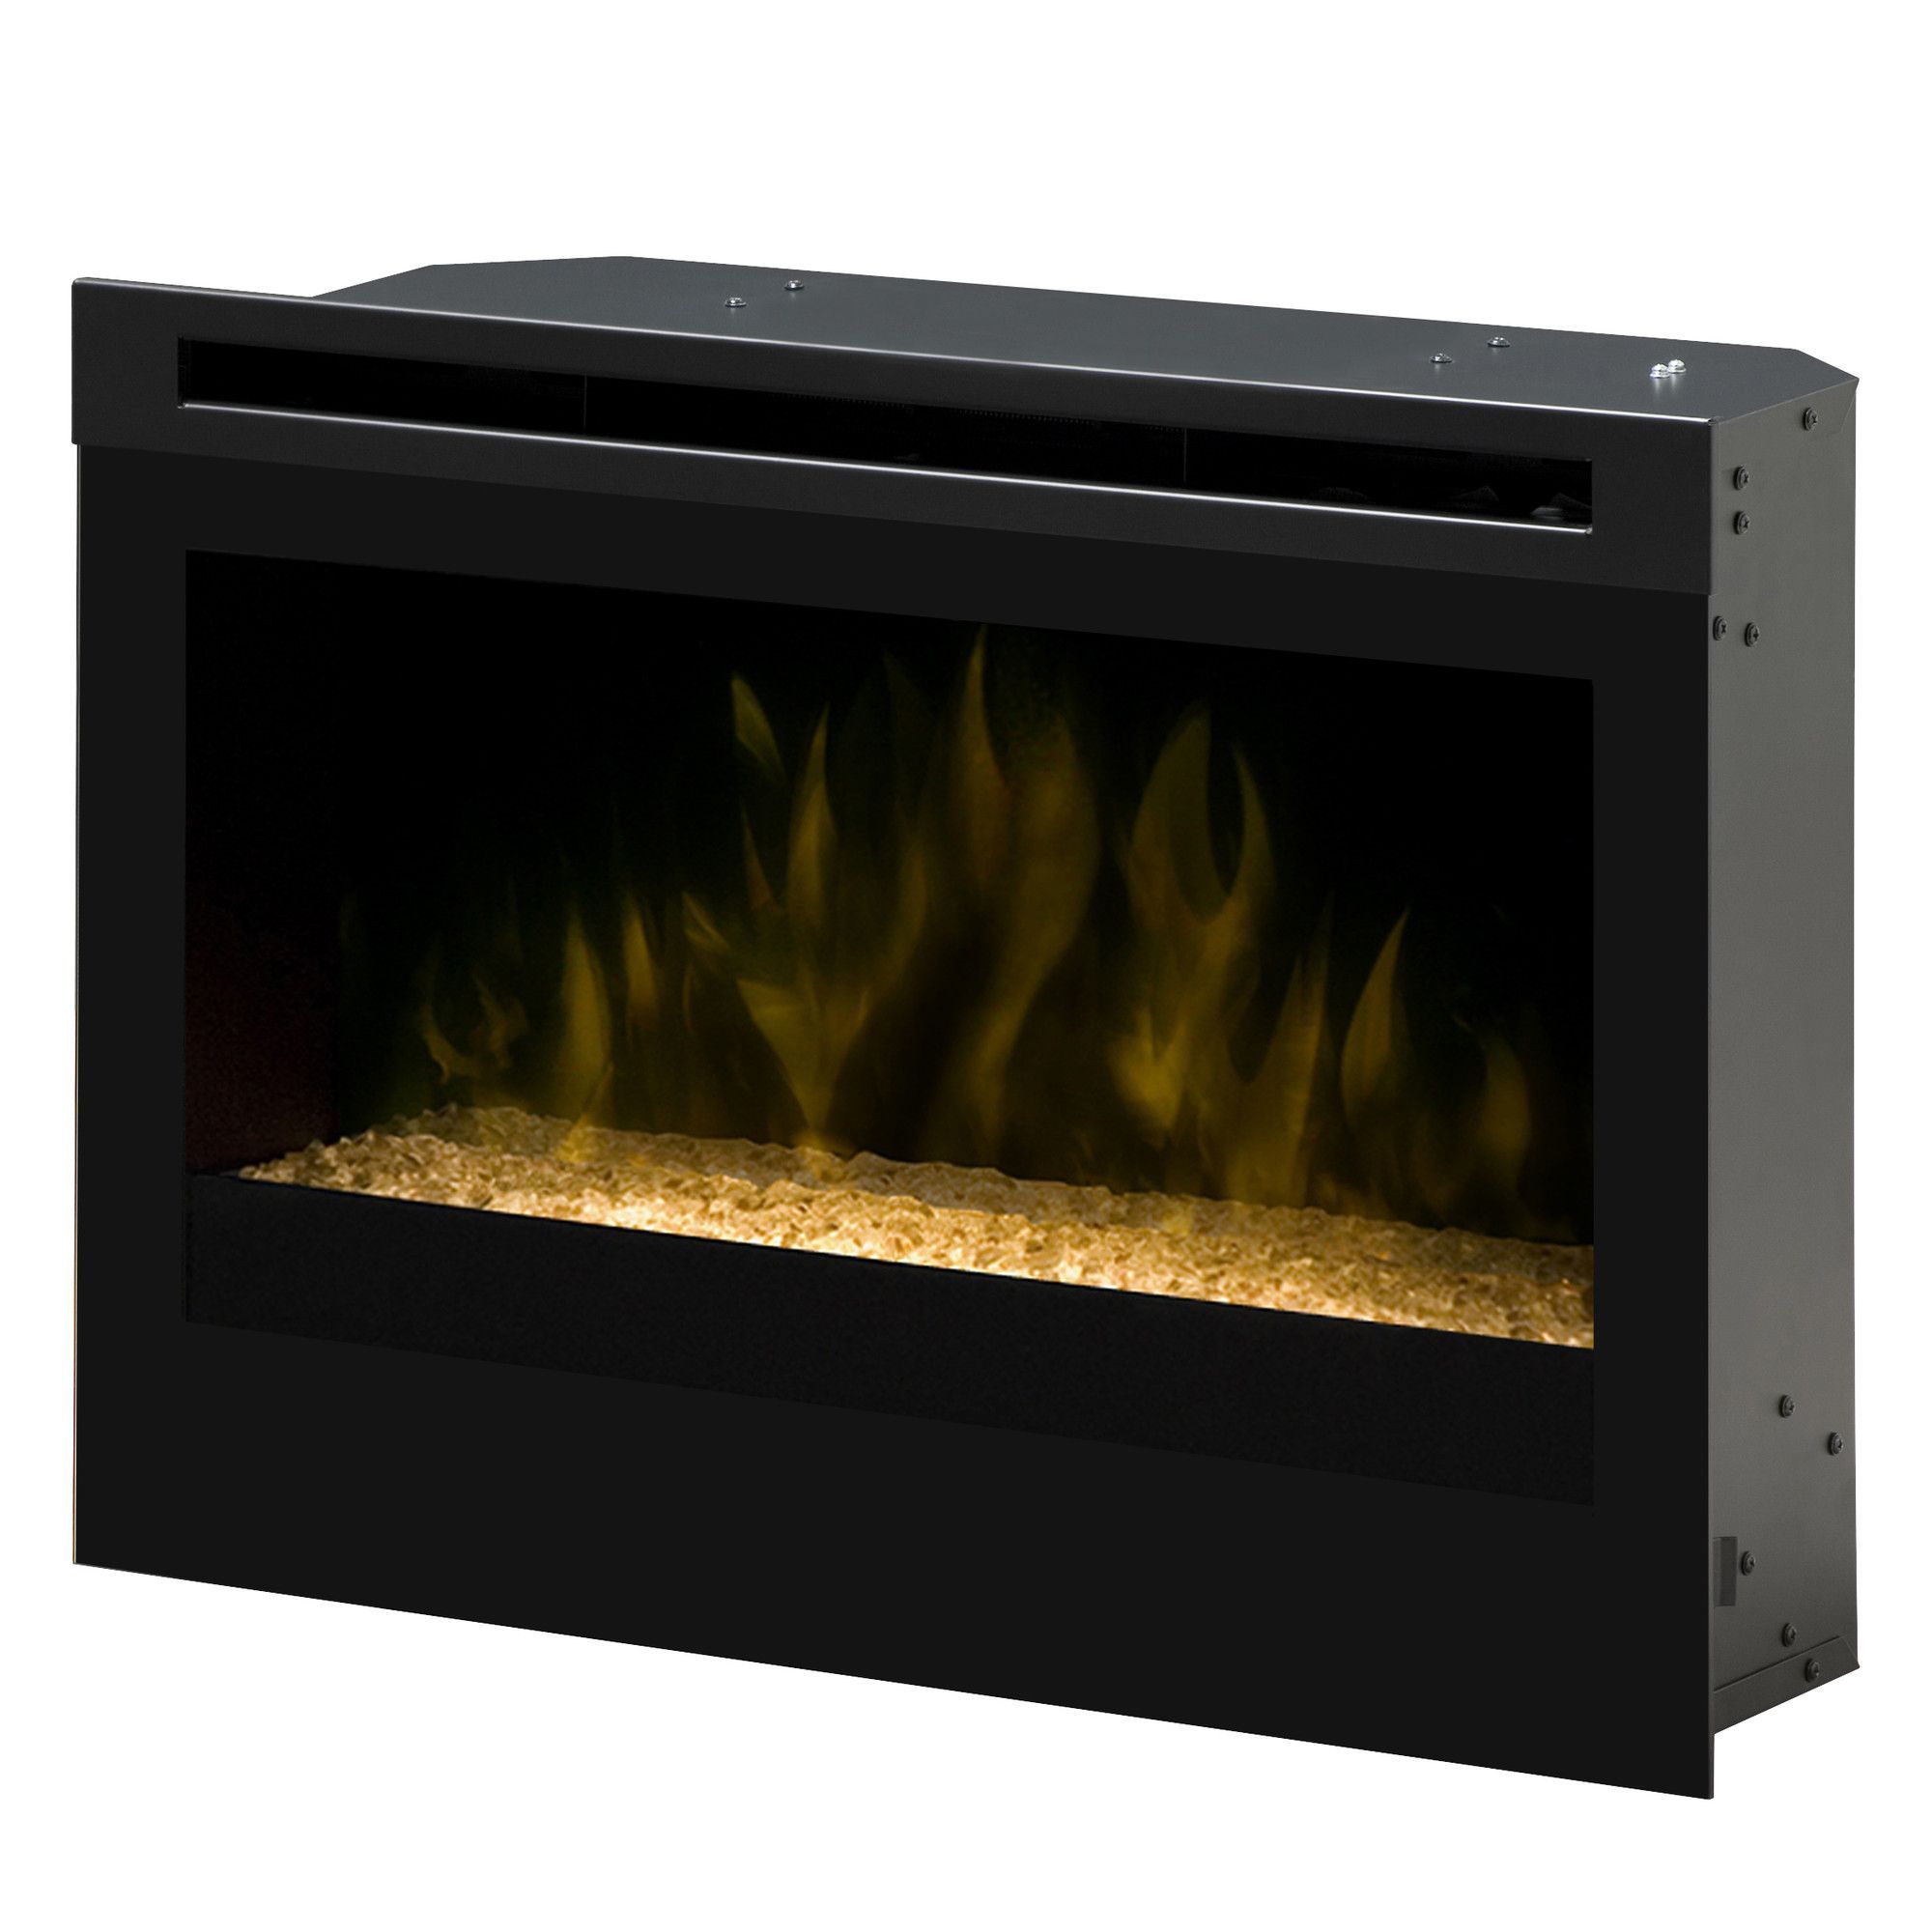 Fake Fireplace Heater Inspirational the Latest Concept In Electric Space Heaters the Dimplex